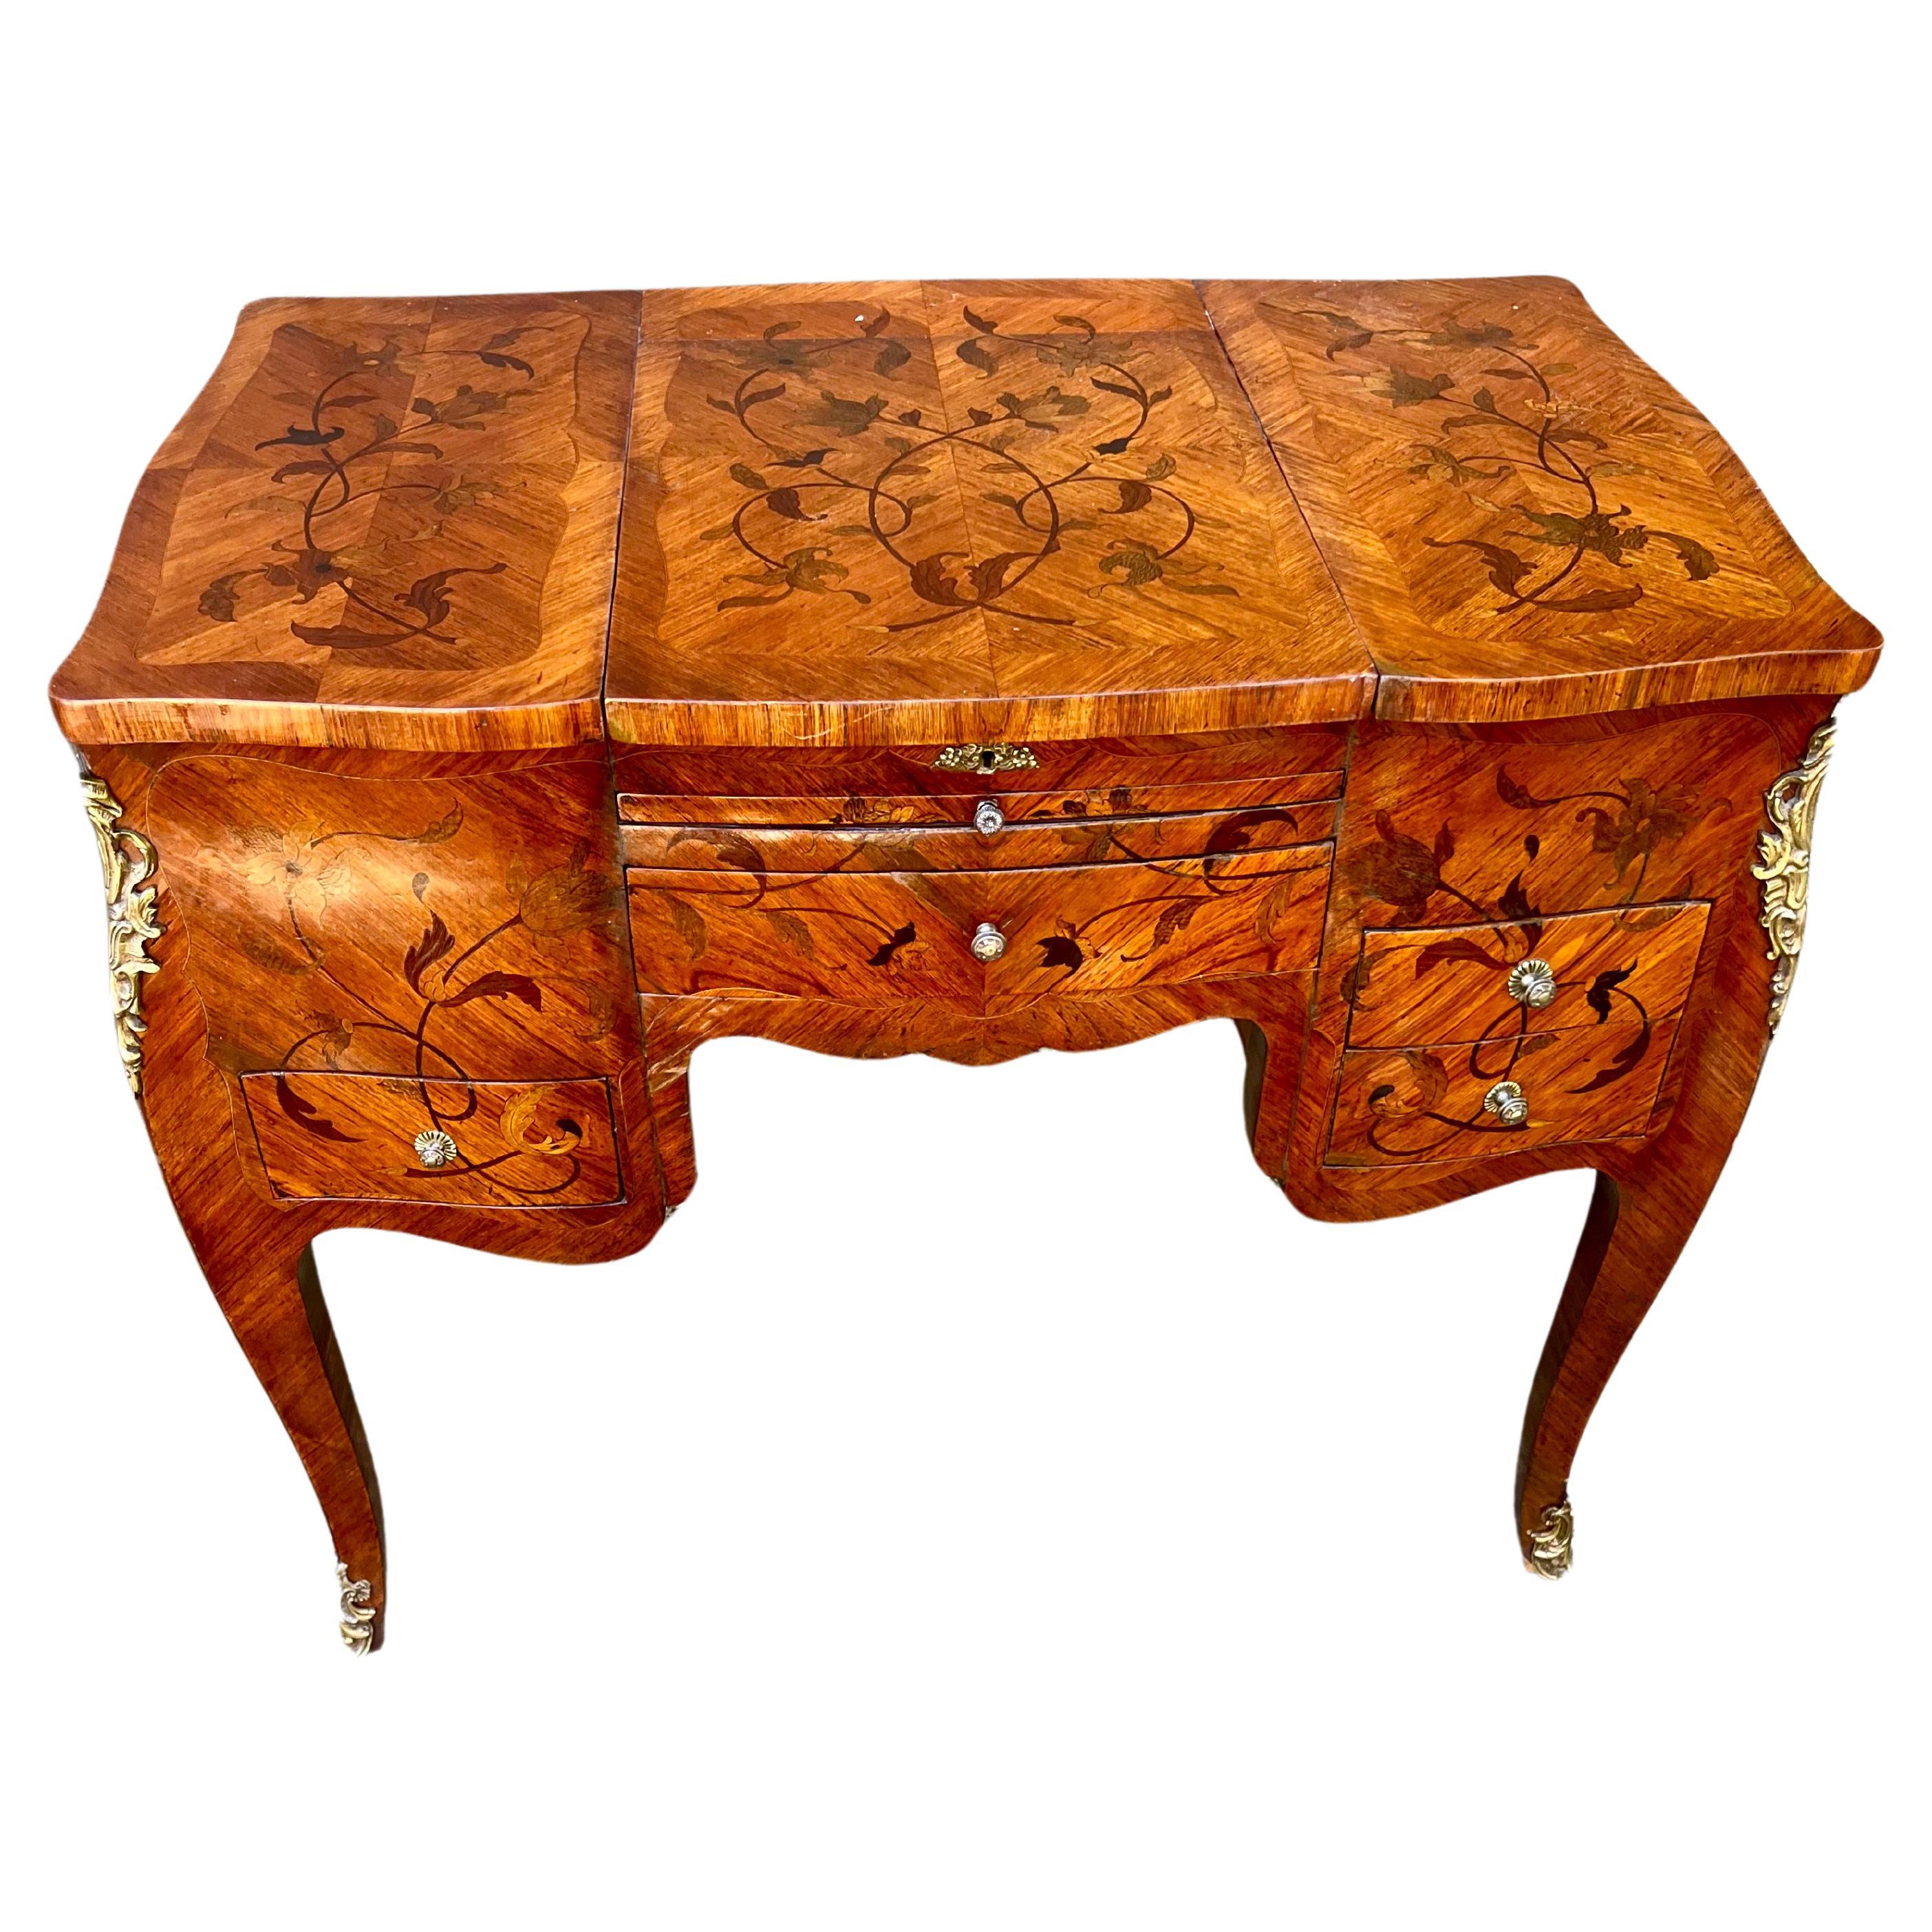 A pretty tulipwood parquetry with fruitwood floral marquetry inlay poudreuse .It’s original intended use no longer fashionable but popular by the bed , between chairs or windows as a small chest or table with ample storage .

Presents very well and